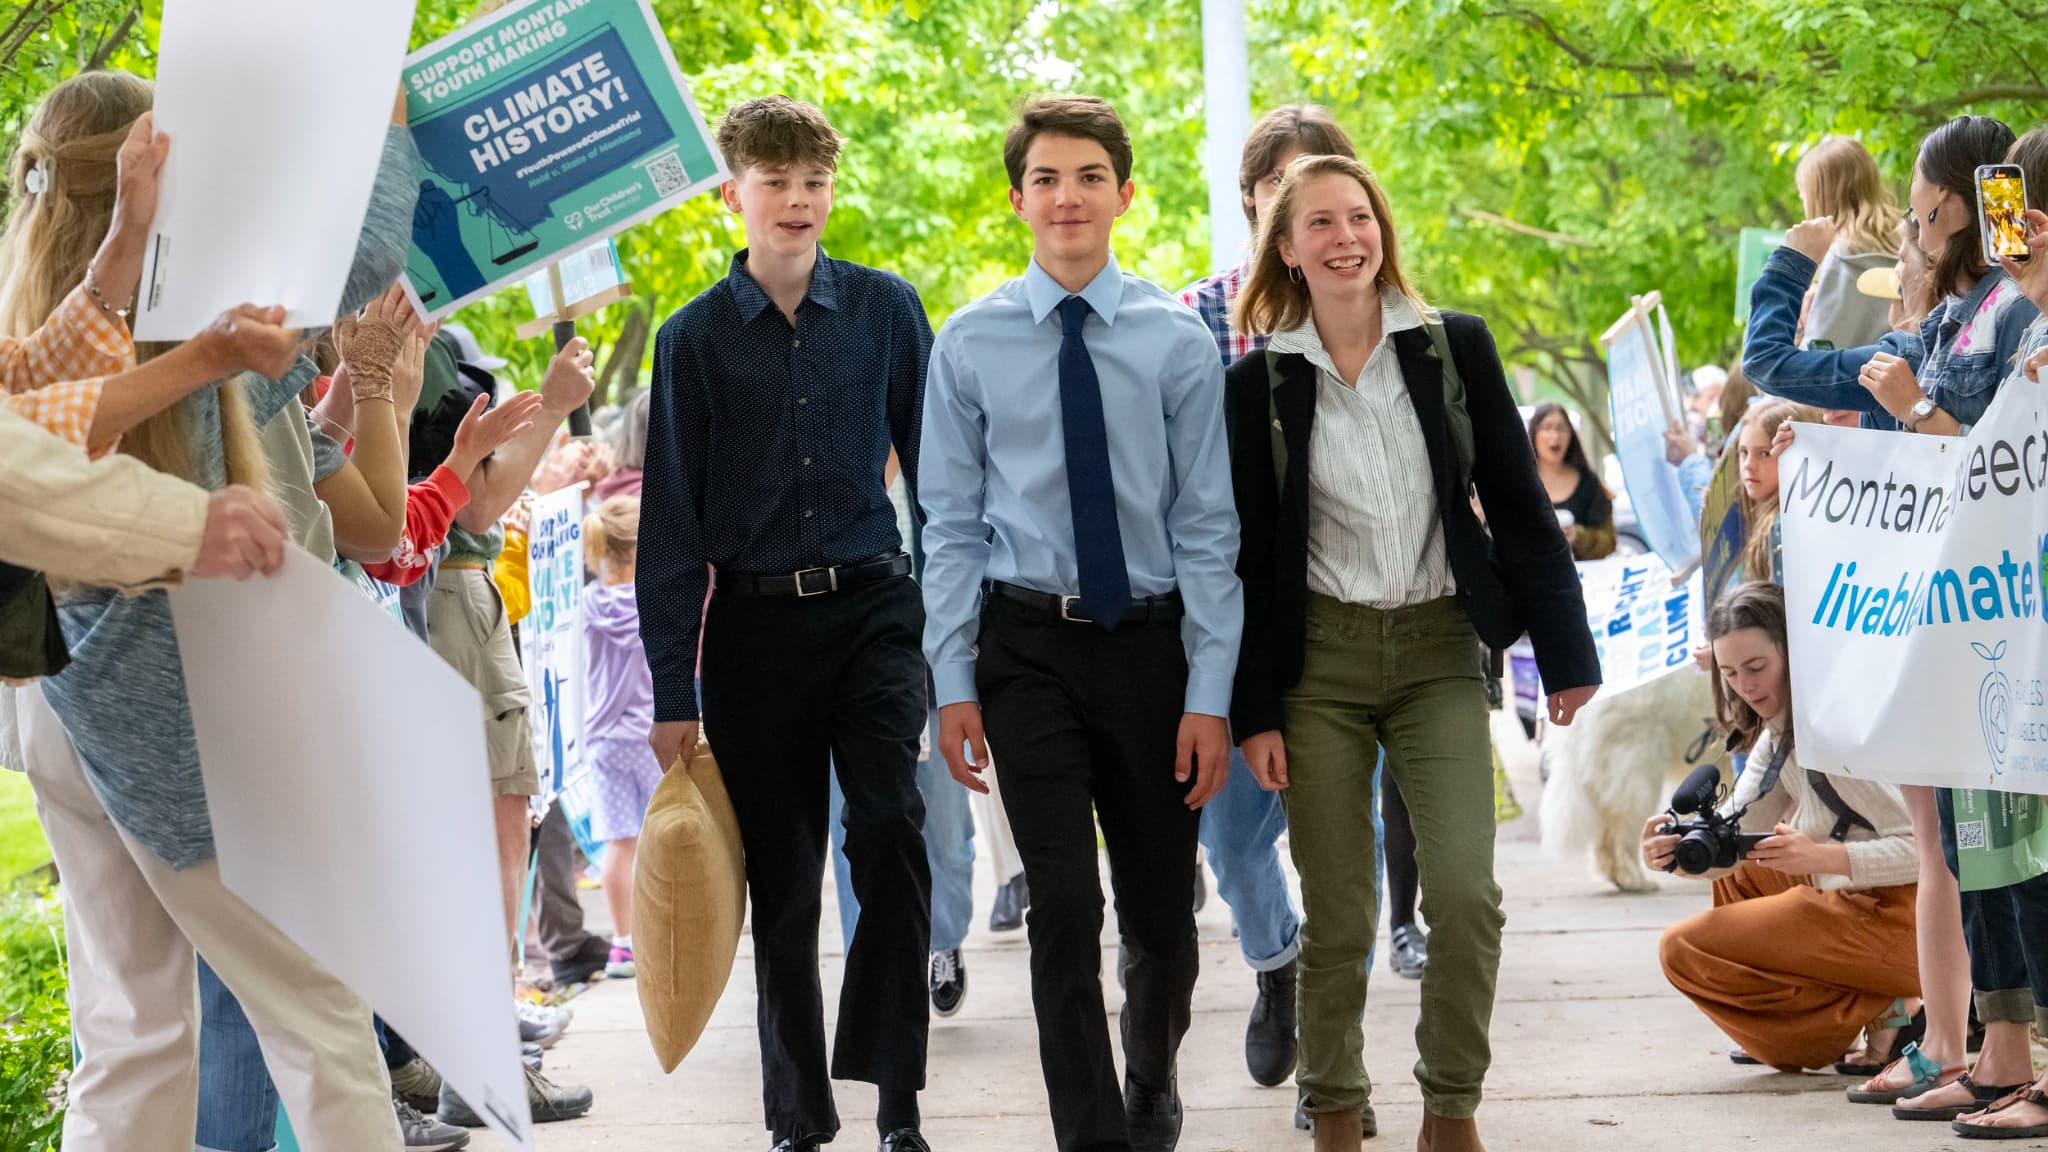 Youngsters between the ages of 5 and 22 score a historic victory in the climate trial